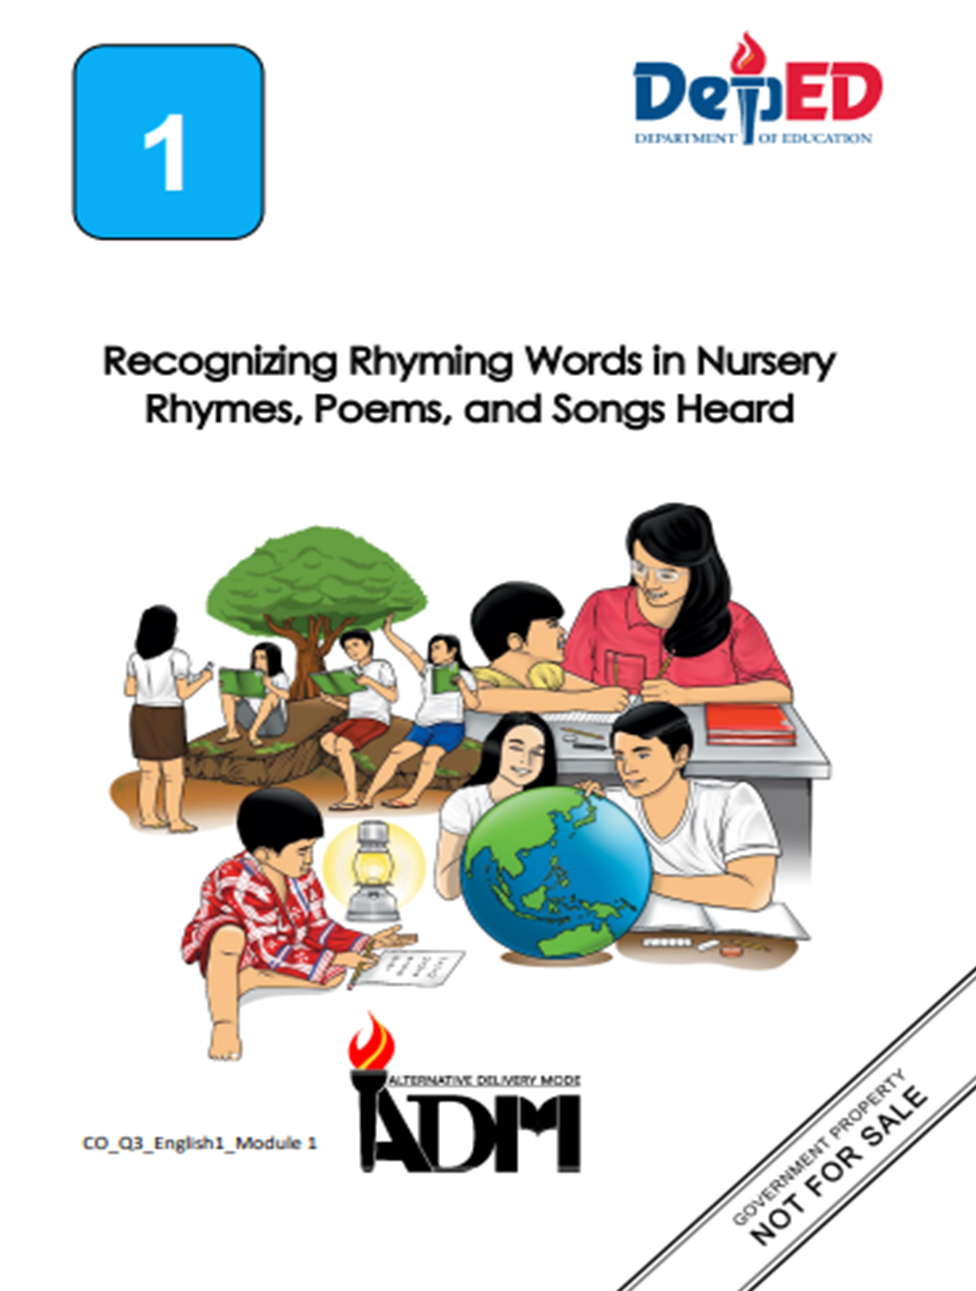 219024-Greenhills Elementary School-English1-Quarter 3-Module 2-Recognizing Rhyming Words in Nursery Rhymes, Poems and Songs Heard